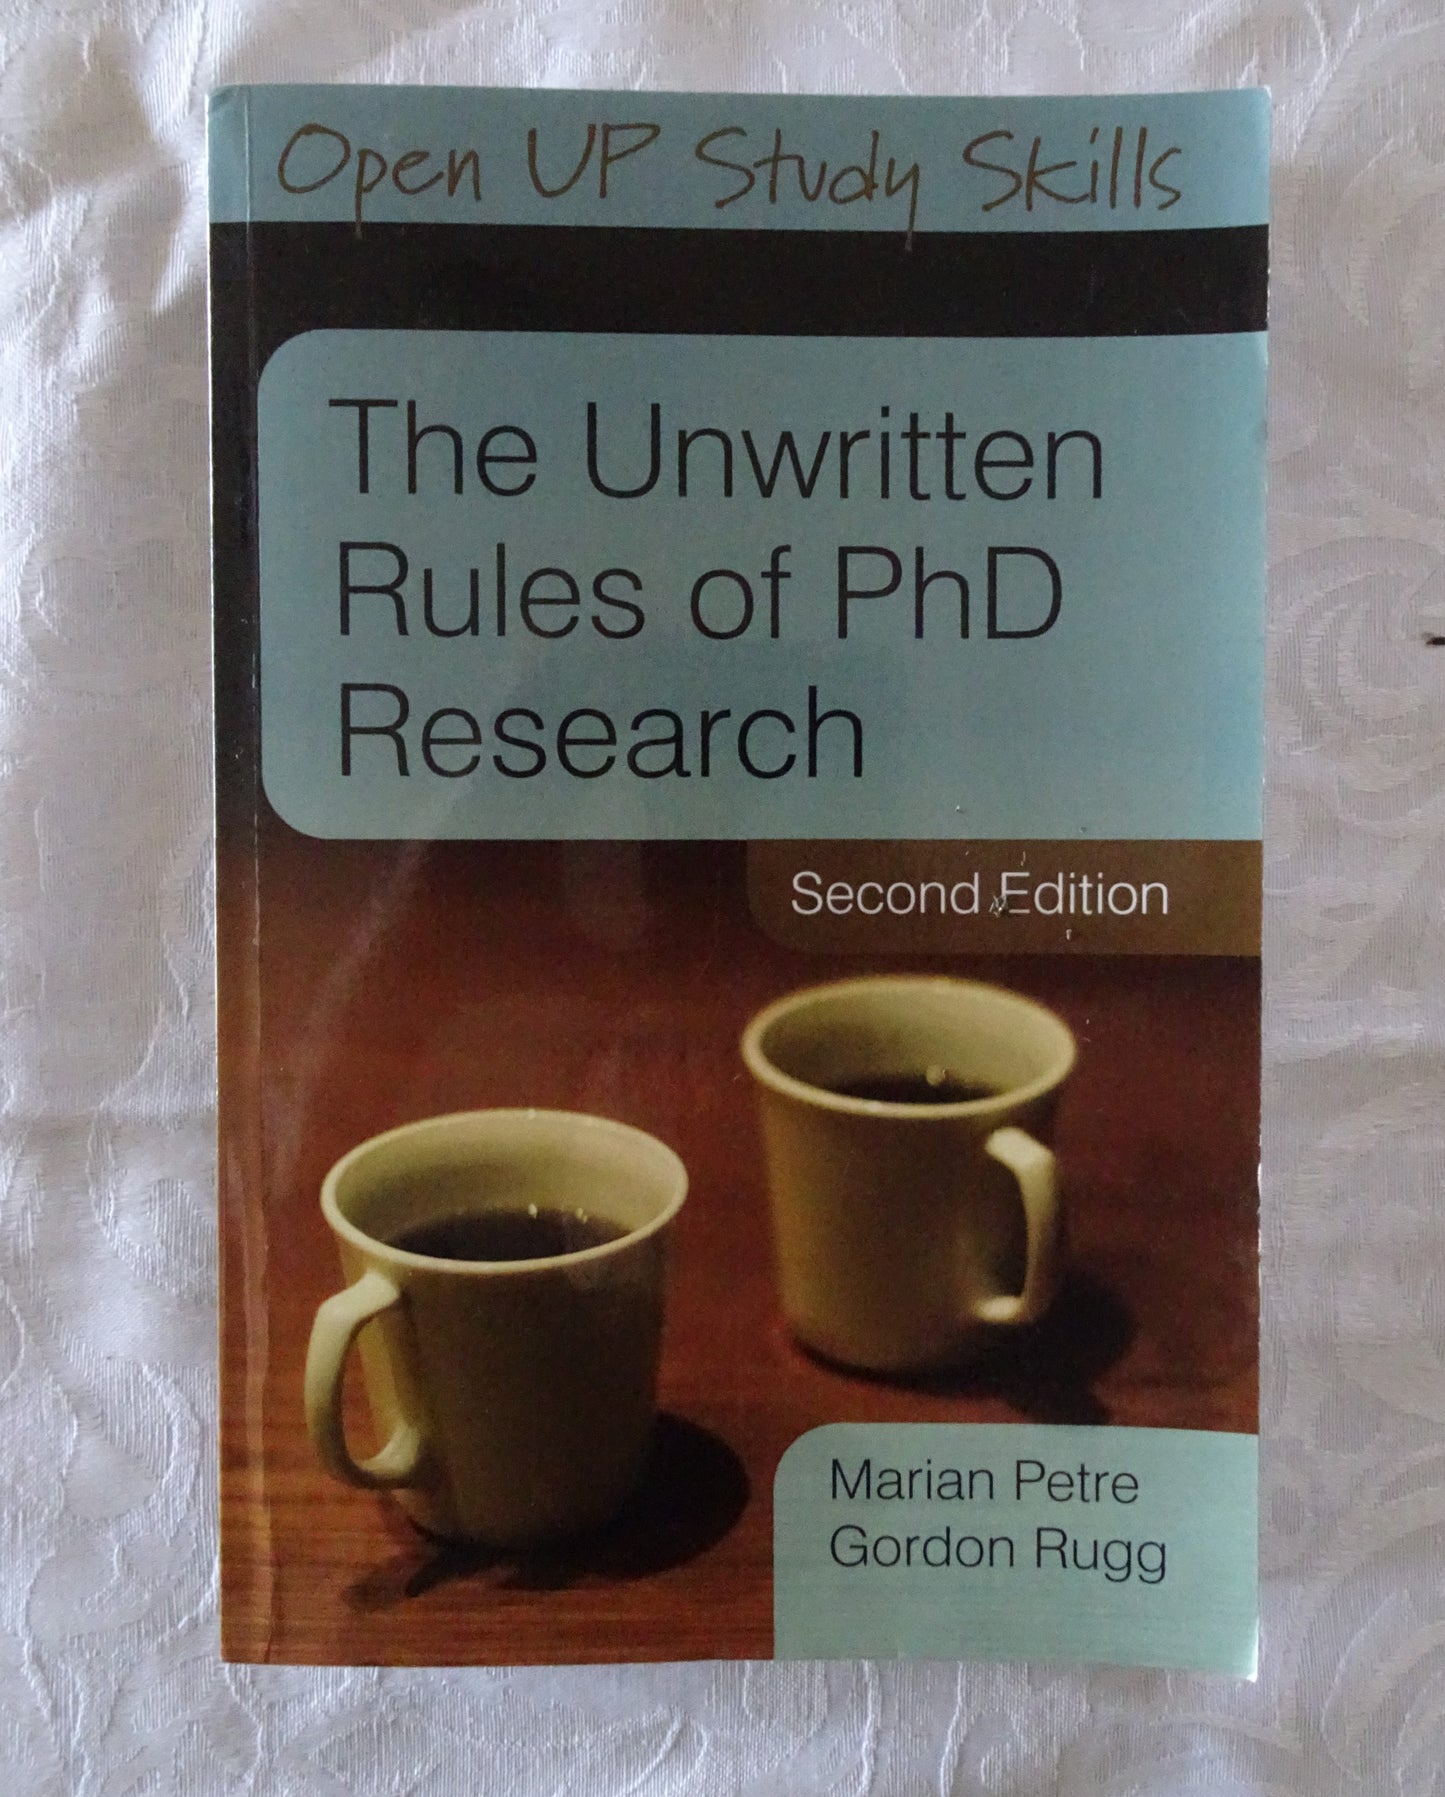 The Unwritten Rules of PhD Research by Marian Petre and Gordon Rugg